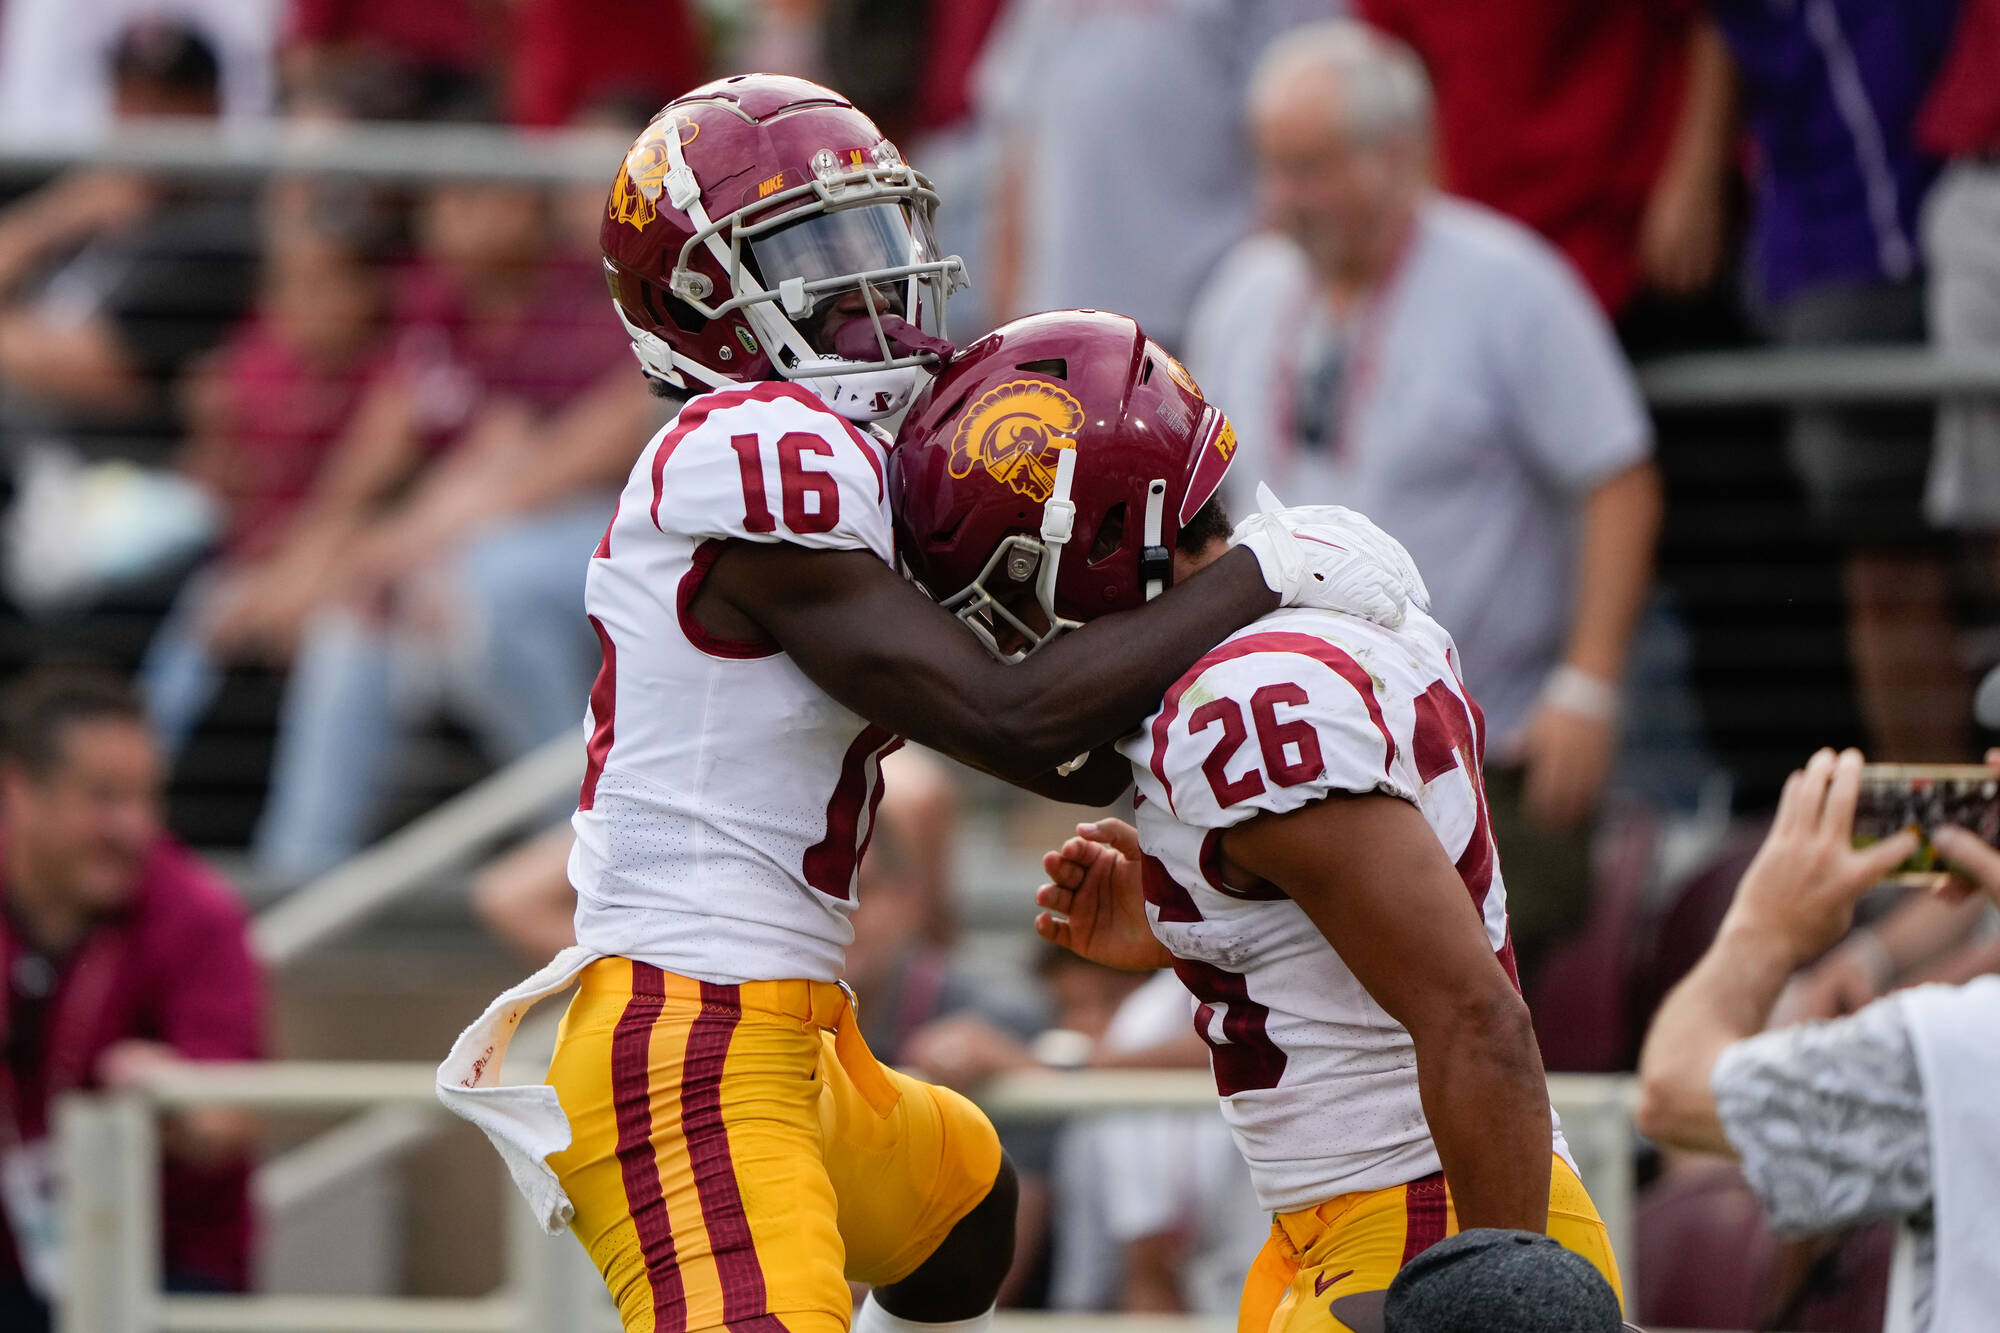 No. 7 USC (3-0, 1-0 in Pac-12) at Oregon State (3-0, 0-0 in Pac-12), 9:30 p.m., Saturday, Pac-12 Network